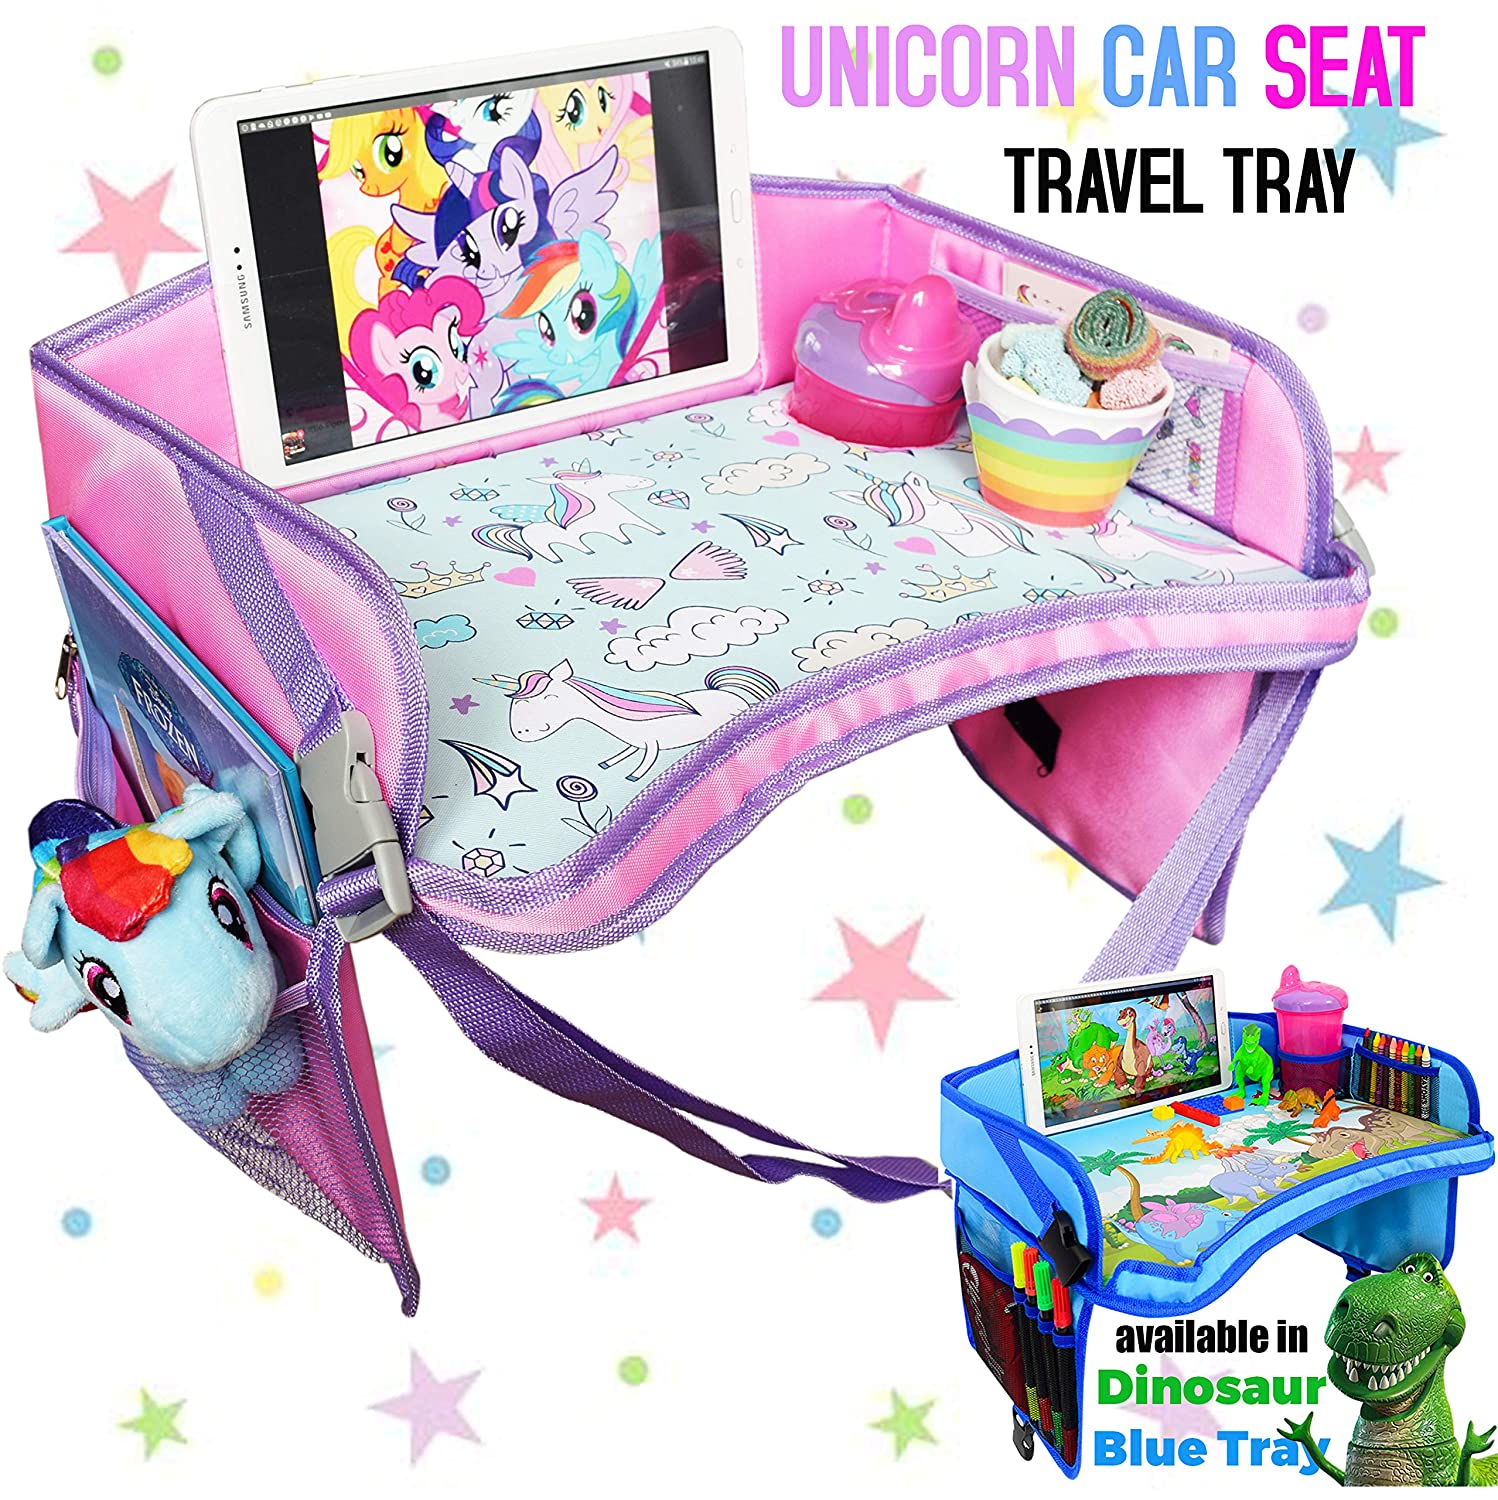 CarSeat Tray - Toddler Travel Tray Guaranteed to Keep Kids Occupied & Entertain for Hours